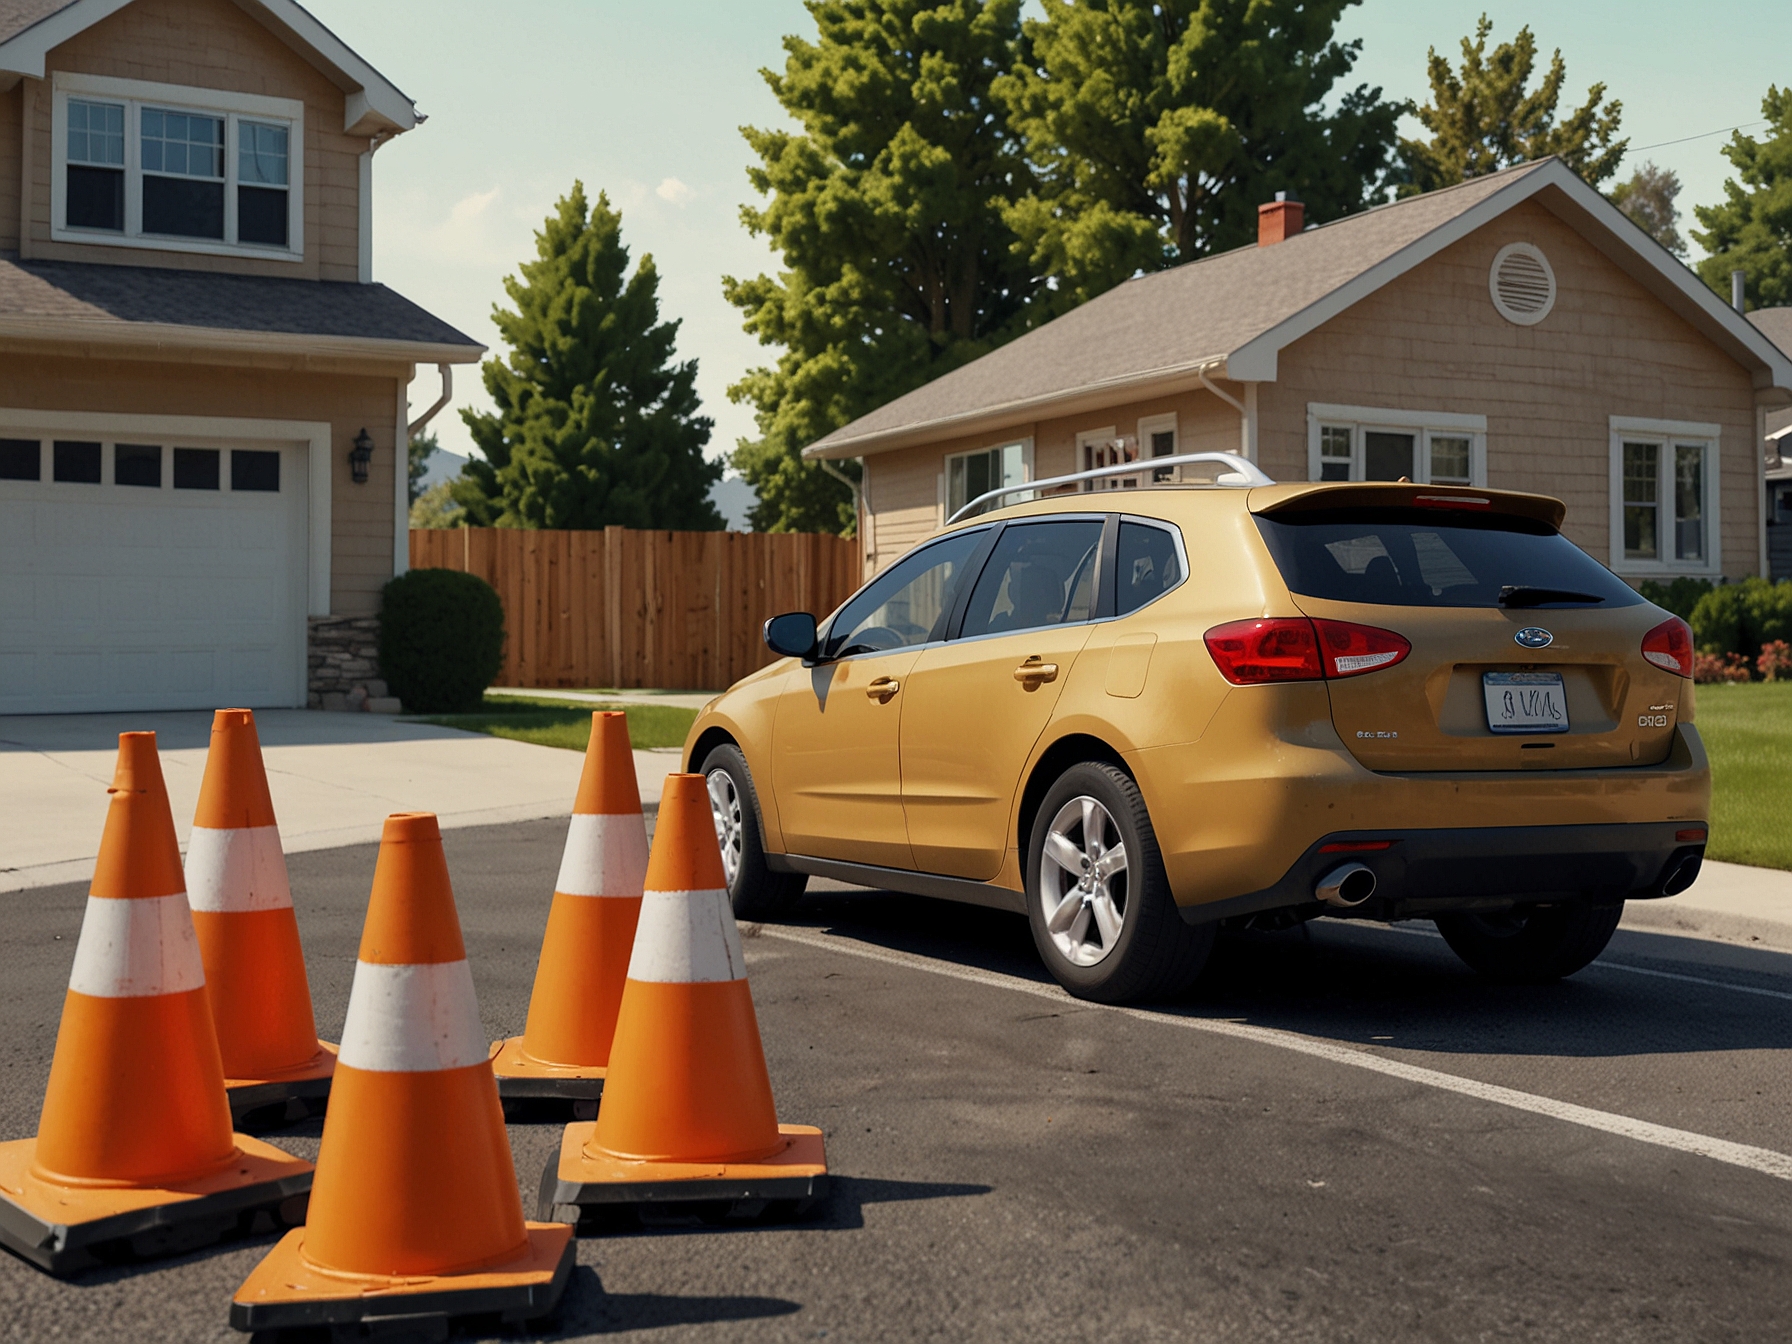 A car with out-of-state plates is surrounded by oversized, colorful traffic cones in a typical suburban driveway, showcasing a unique and comically exaggerated barrier.